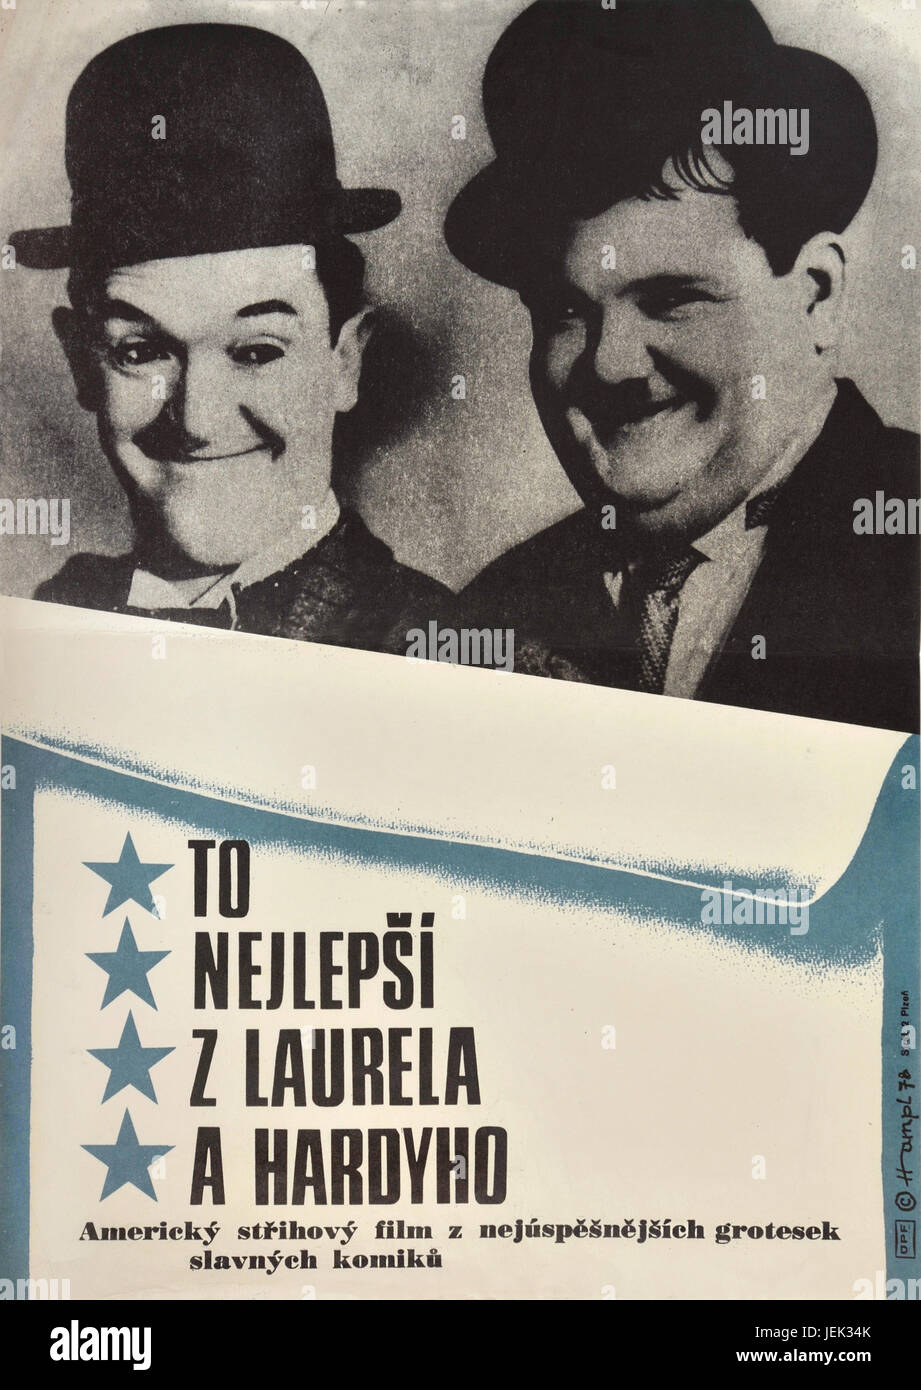 The Best of Laurel and Hardy. 1968. Original Czechoslovak movie poster from 1970s. The compilation of classic clips, director James L. Wolcot. Stock Photo